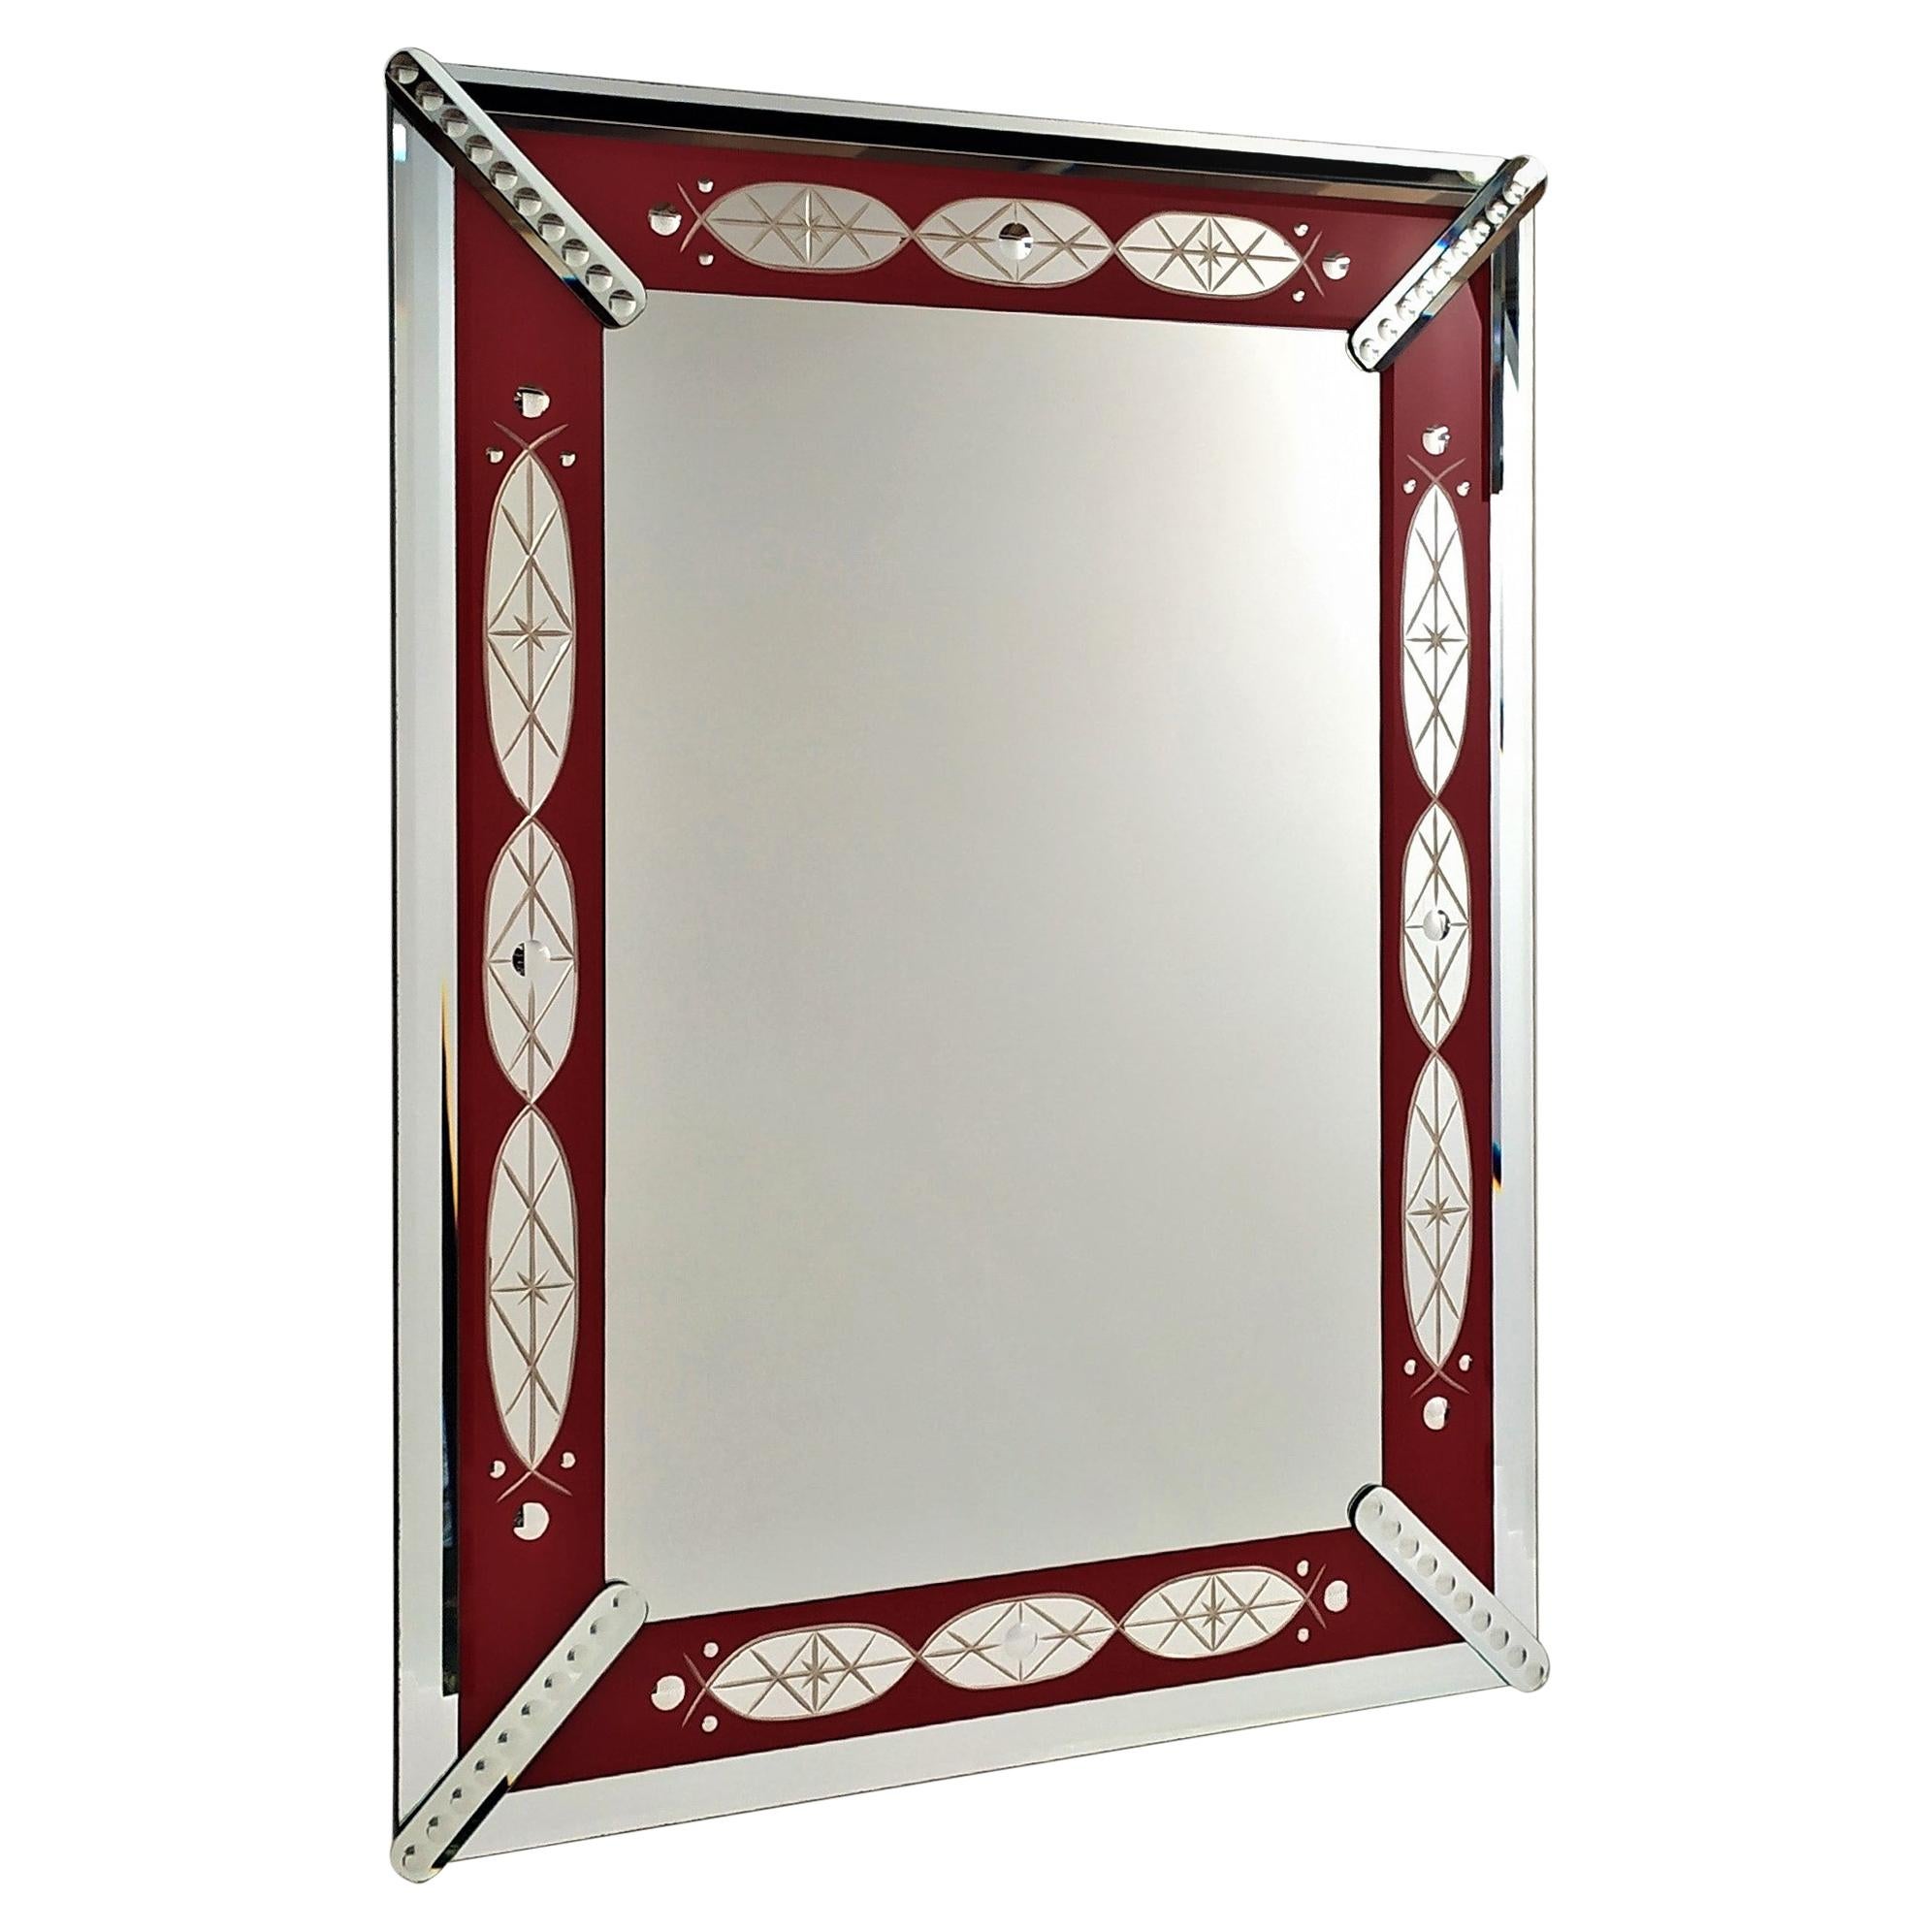 "Red Mirror" by Fratelli Tosi, Murano Glass Mirror, Handmade Made in Italy